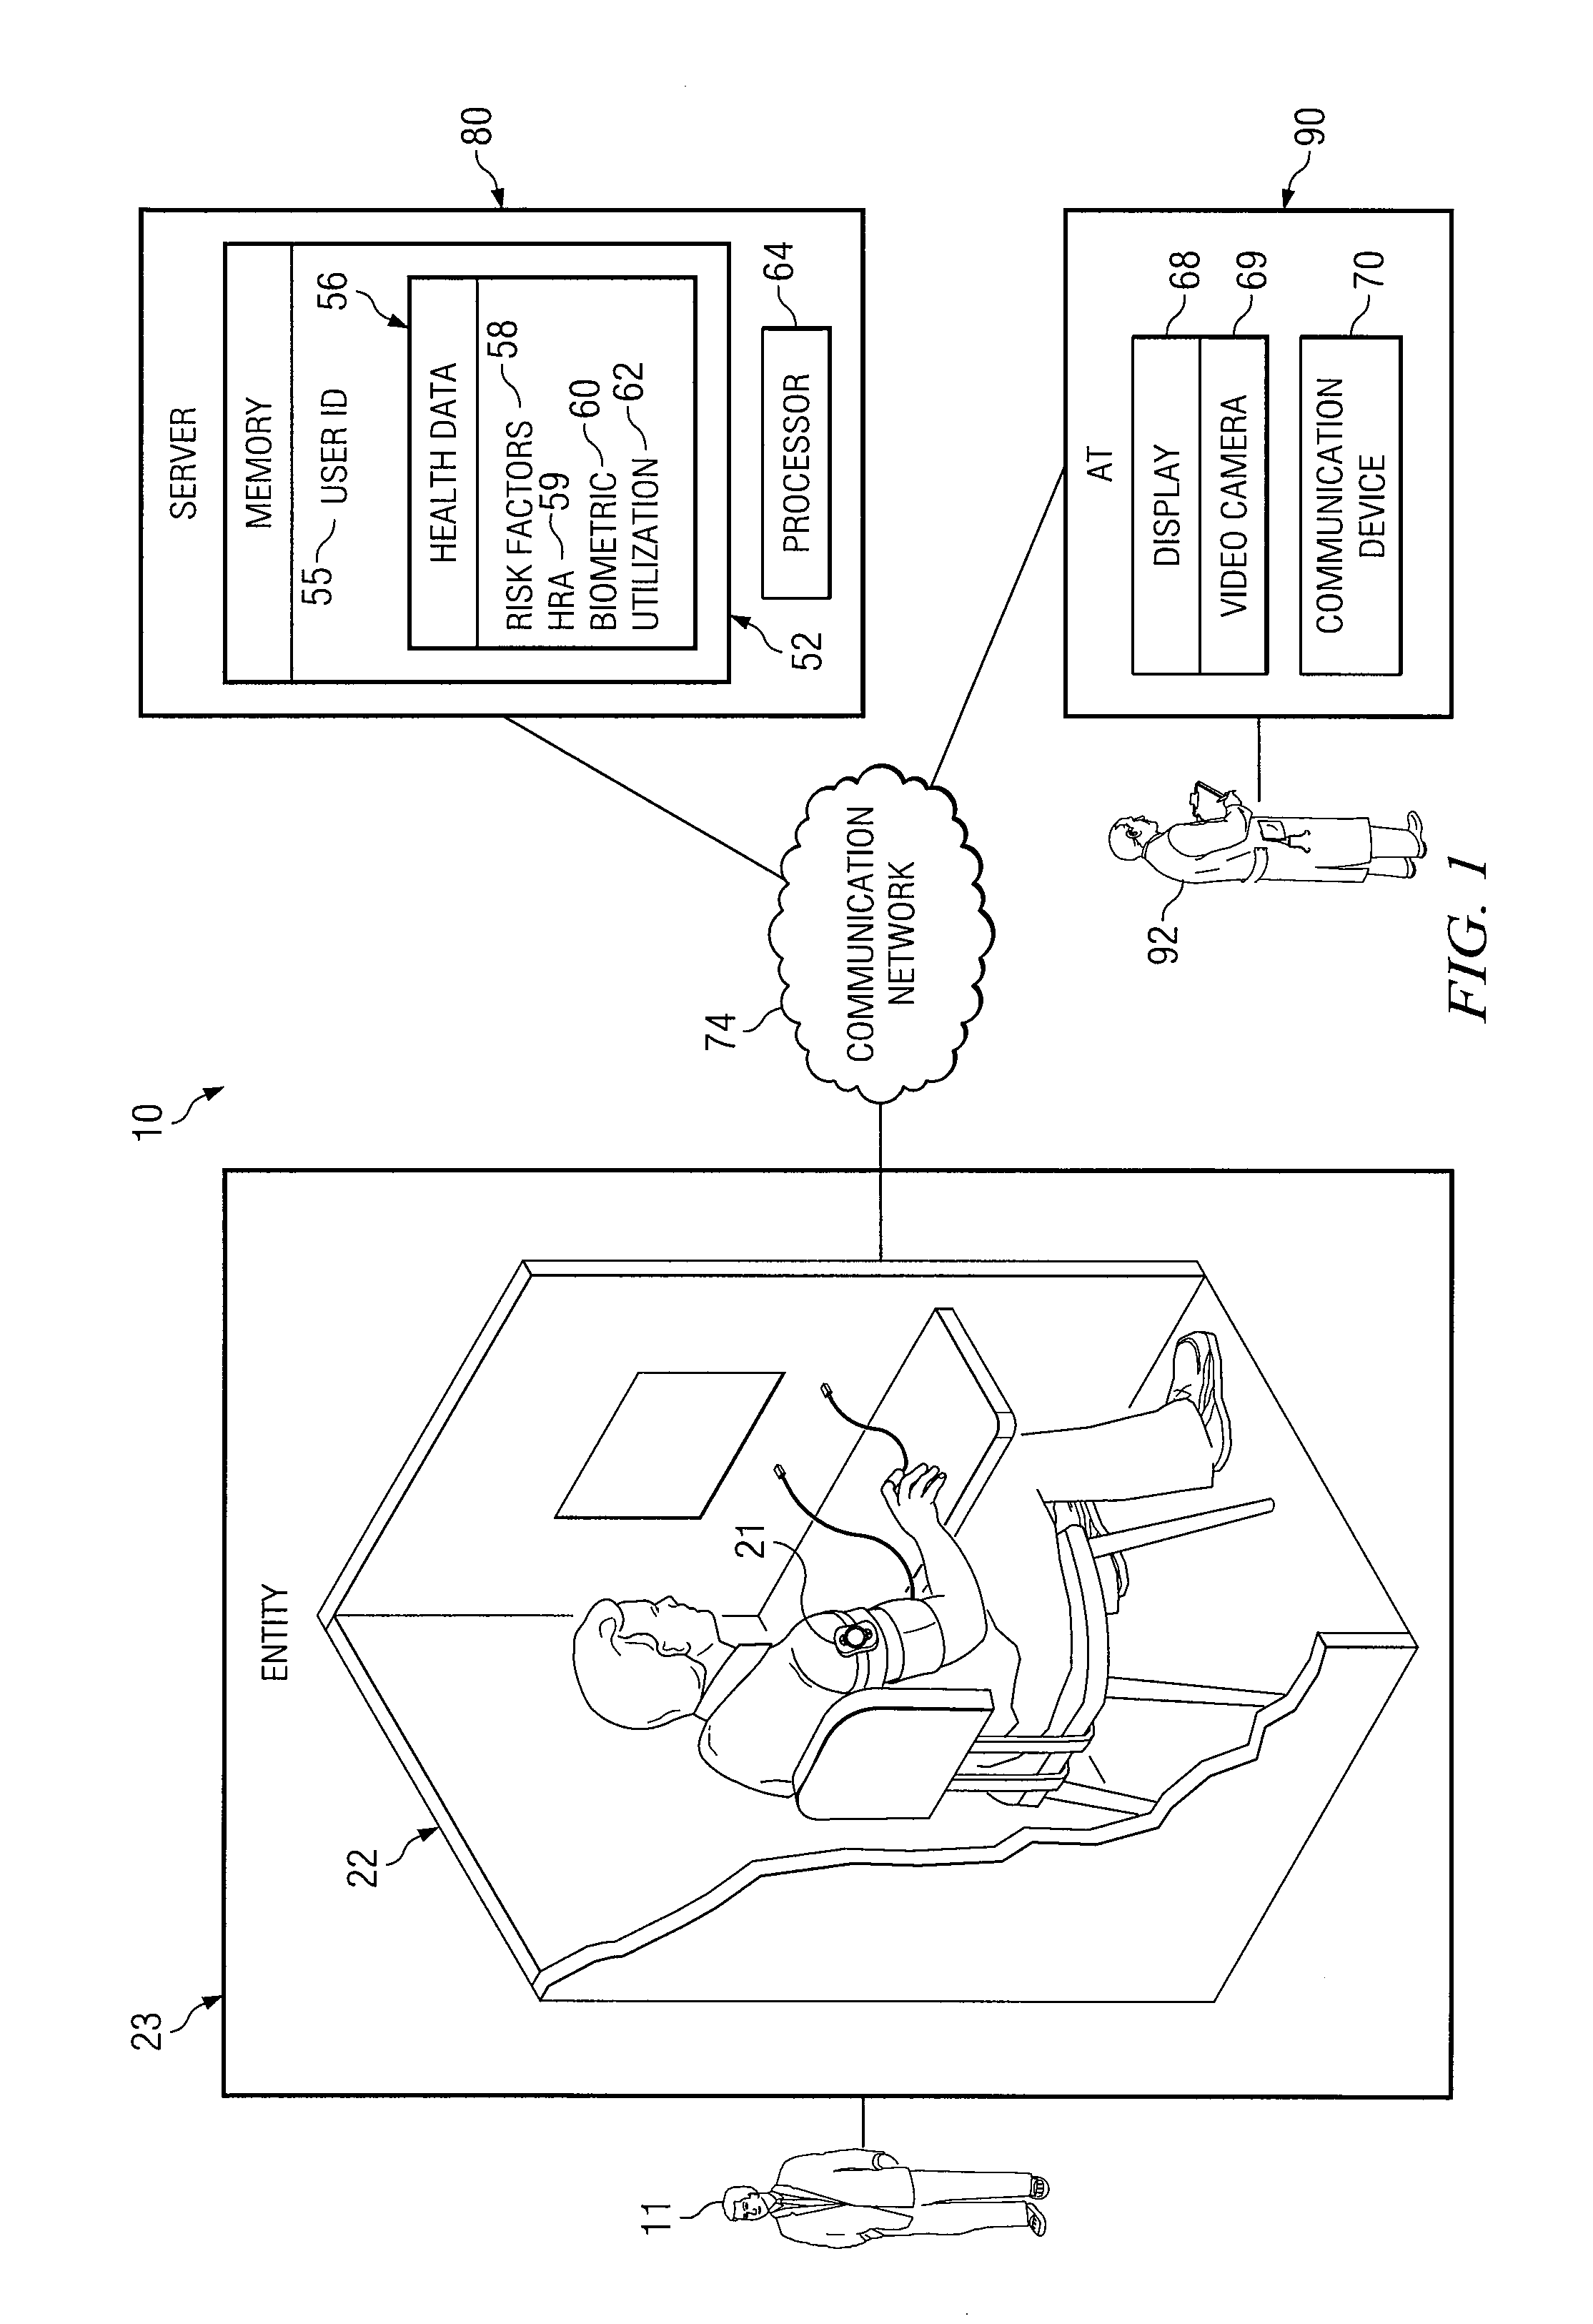 System and Method for Incentivizing a Healthcare Individual Through Music Distribution